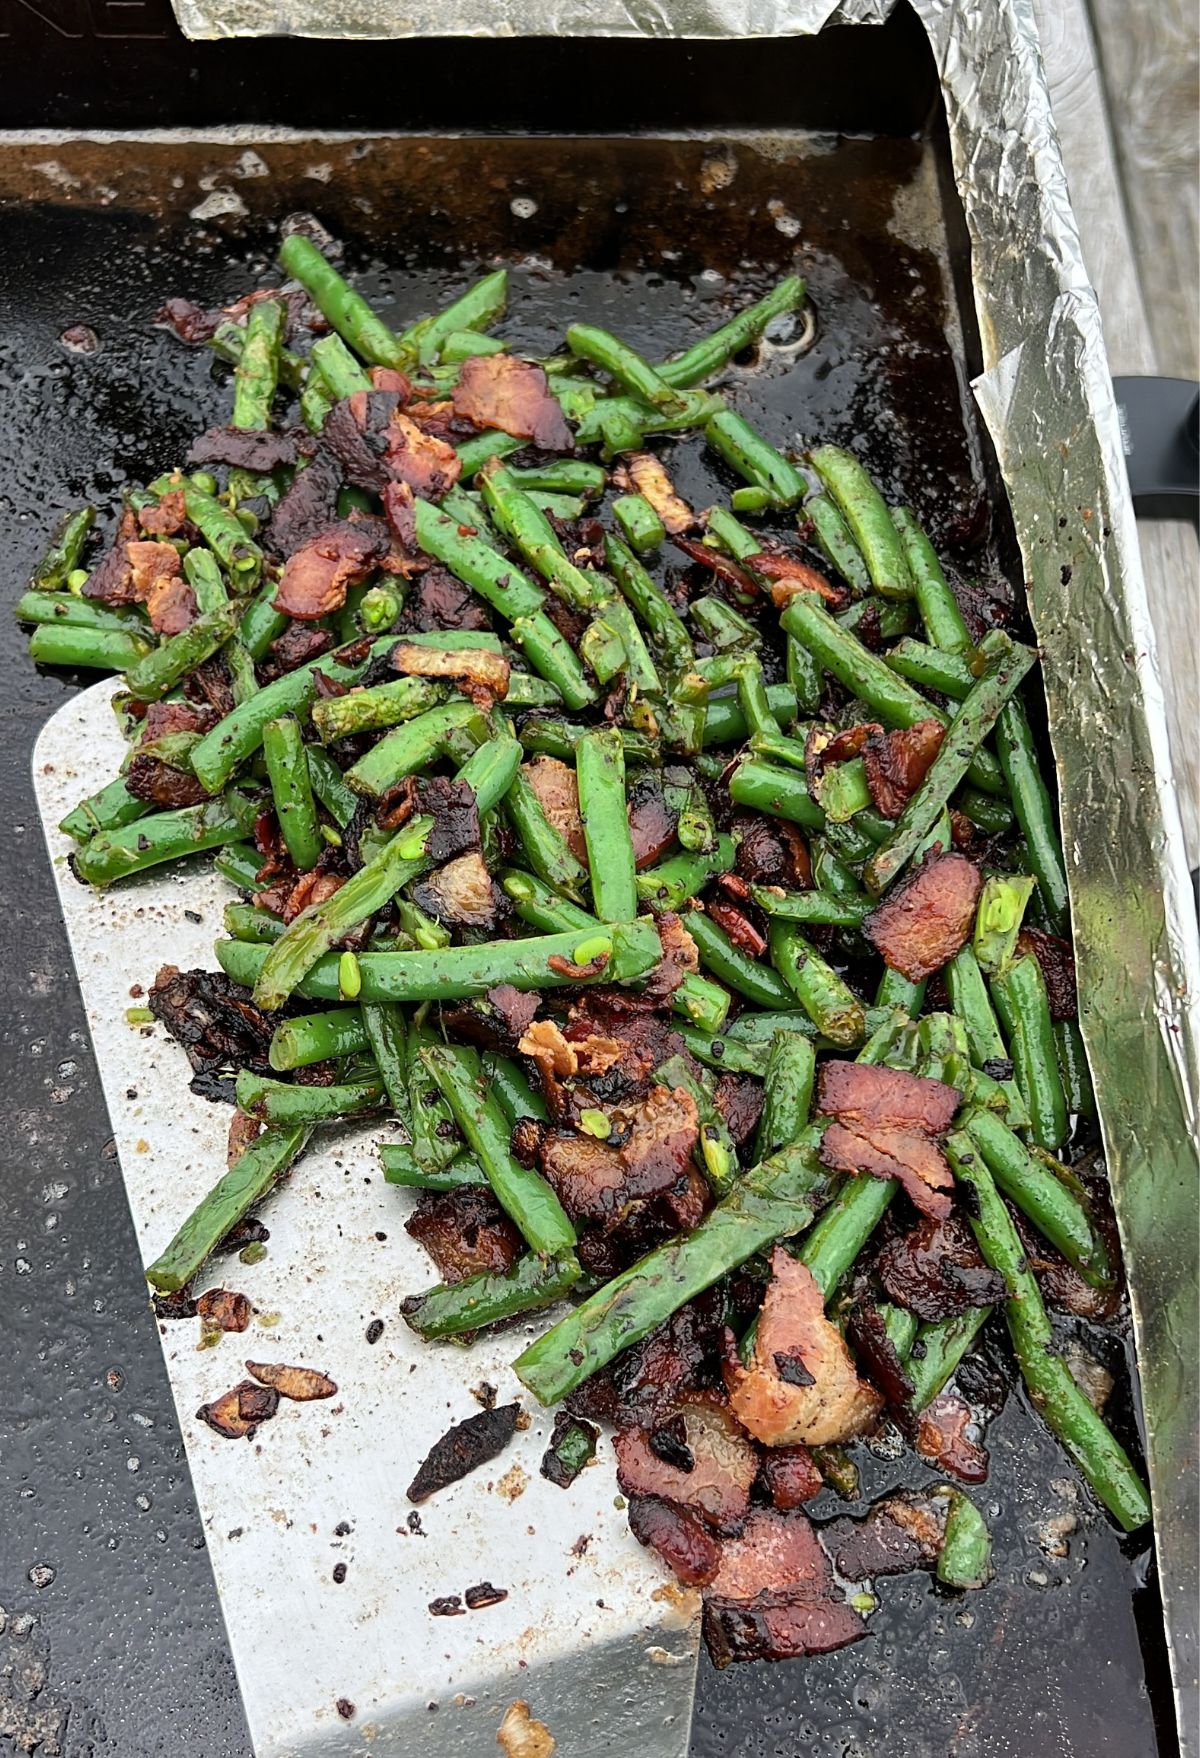 Cooked green beans and bacon pieces on a griddle.